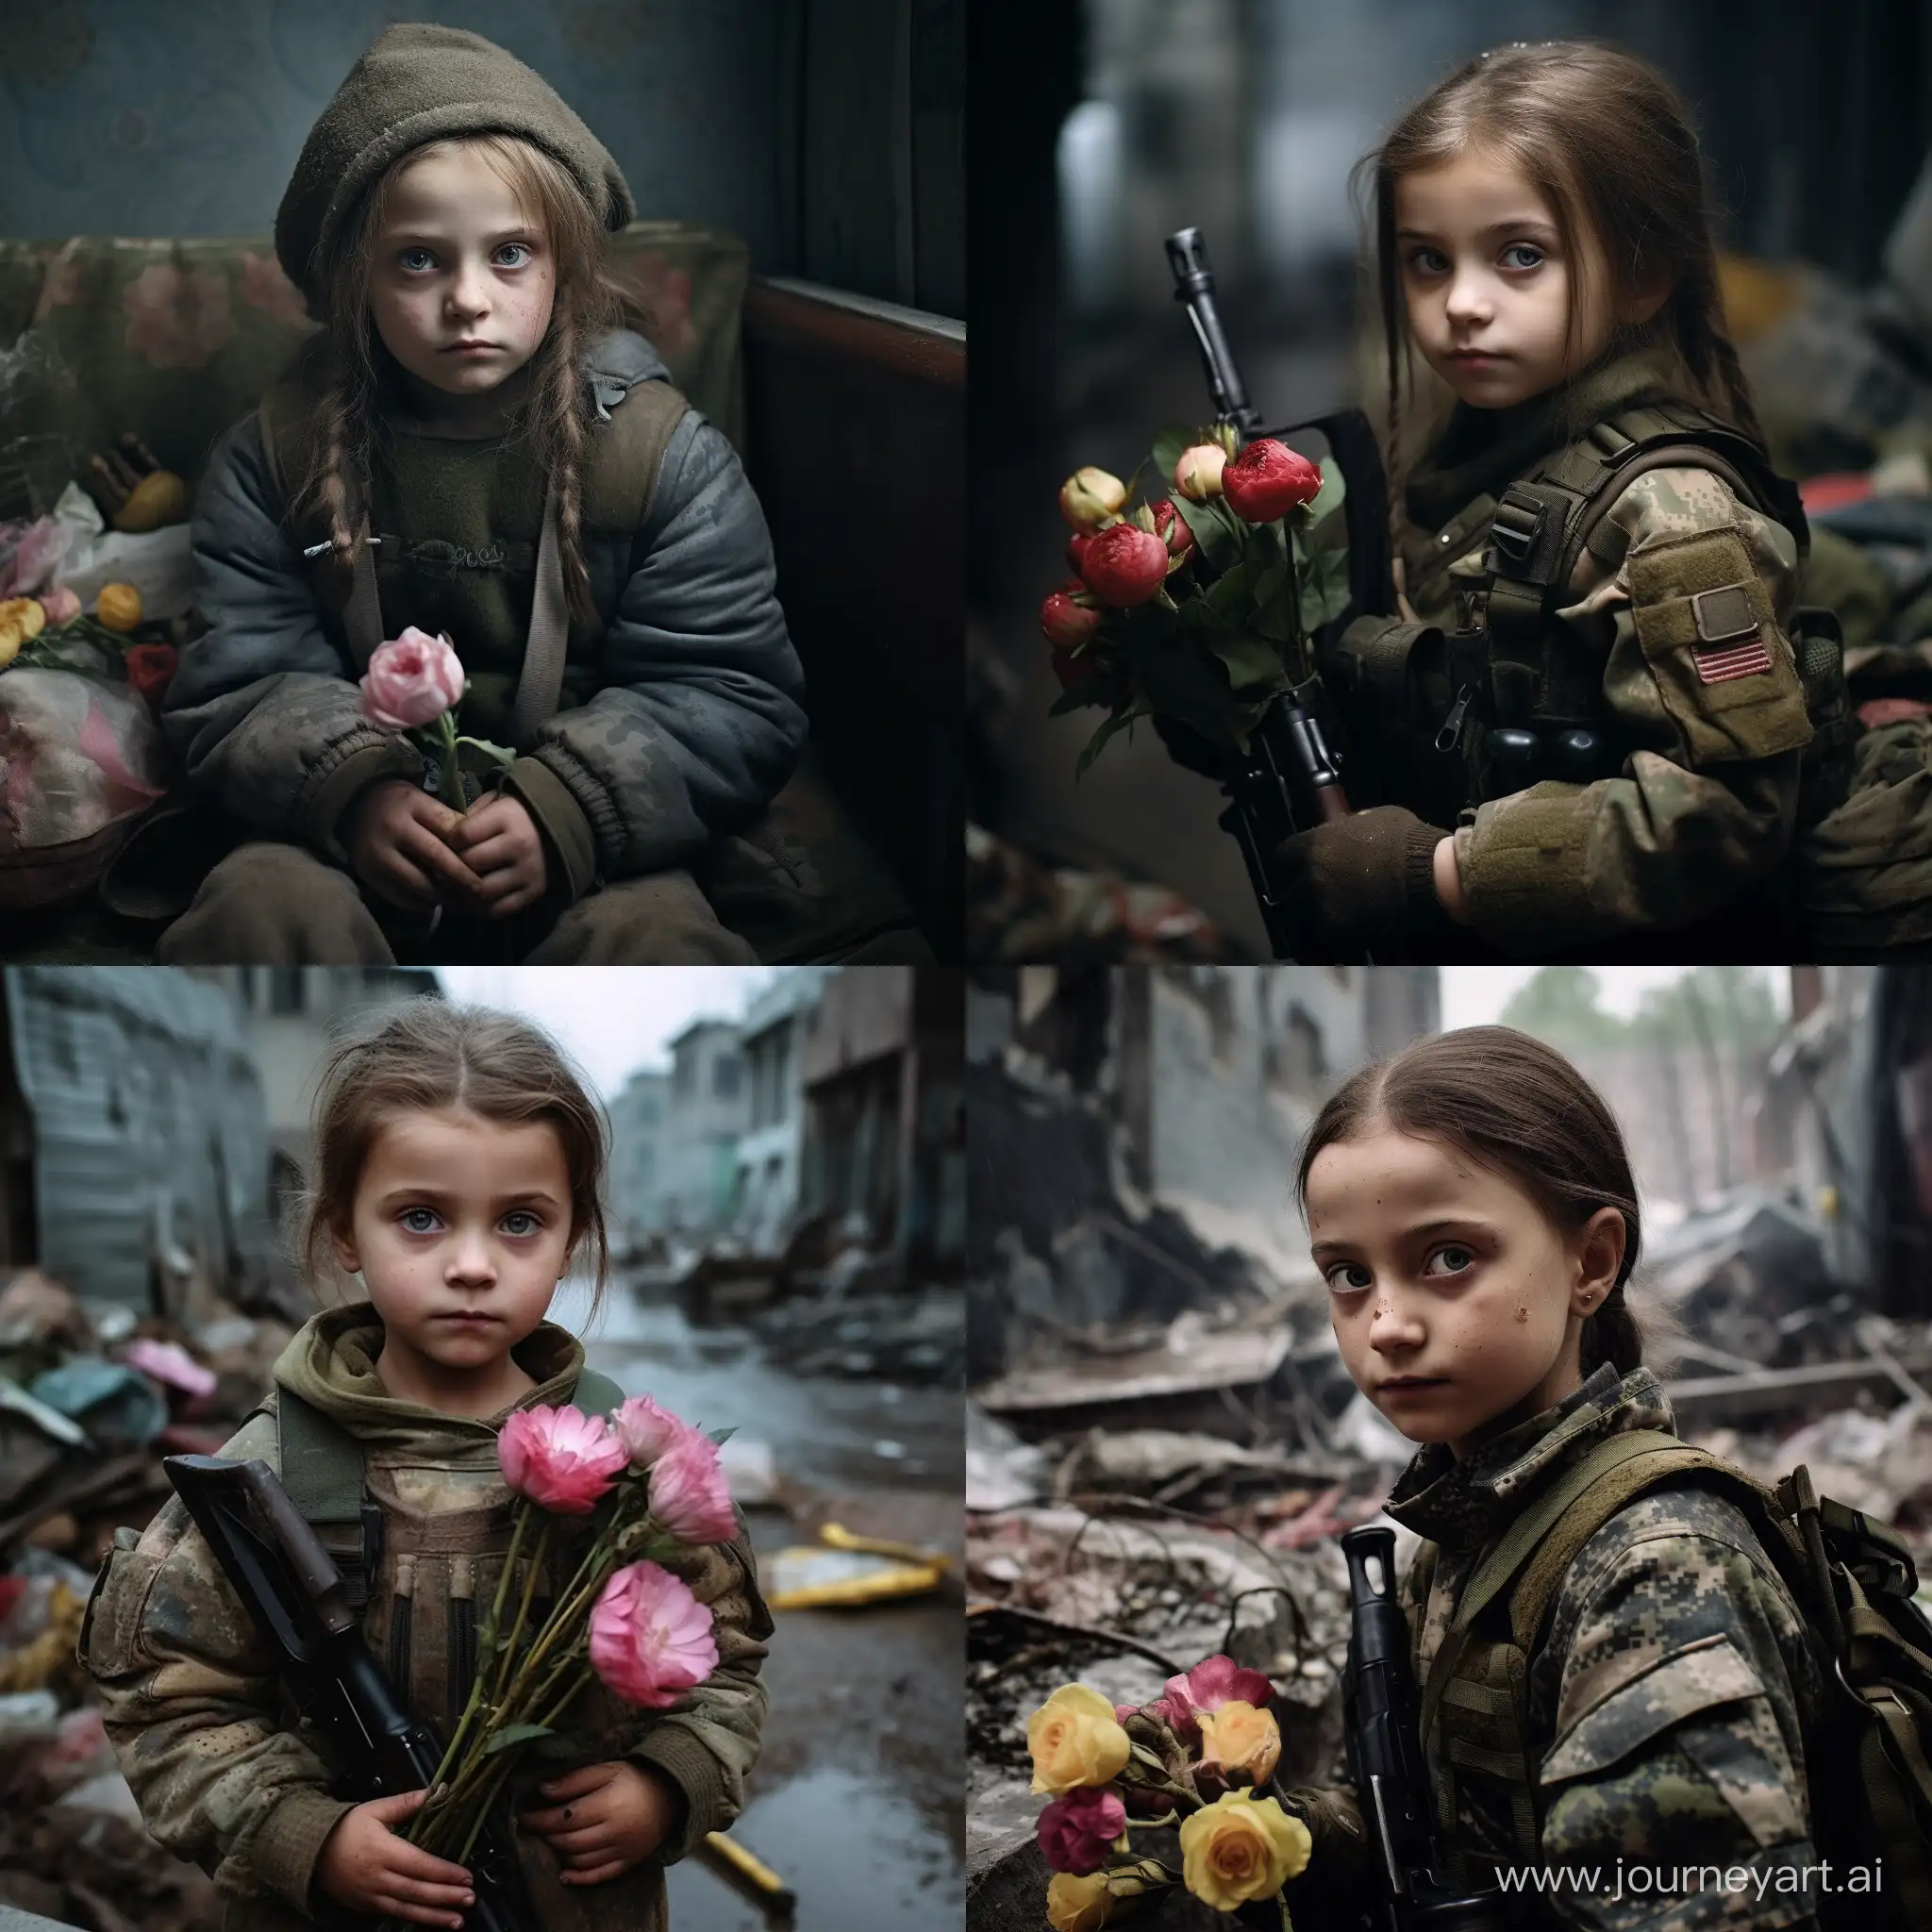 A little girl from Ukraine is waiting for her father on her birthday. But the father is at war against Russia.